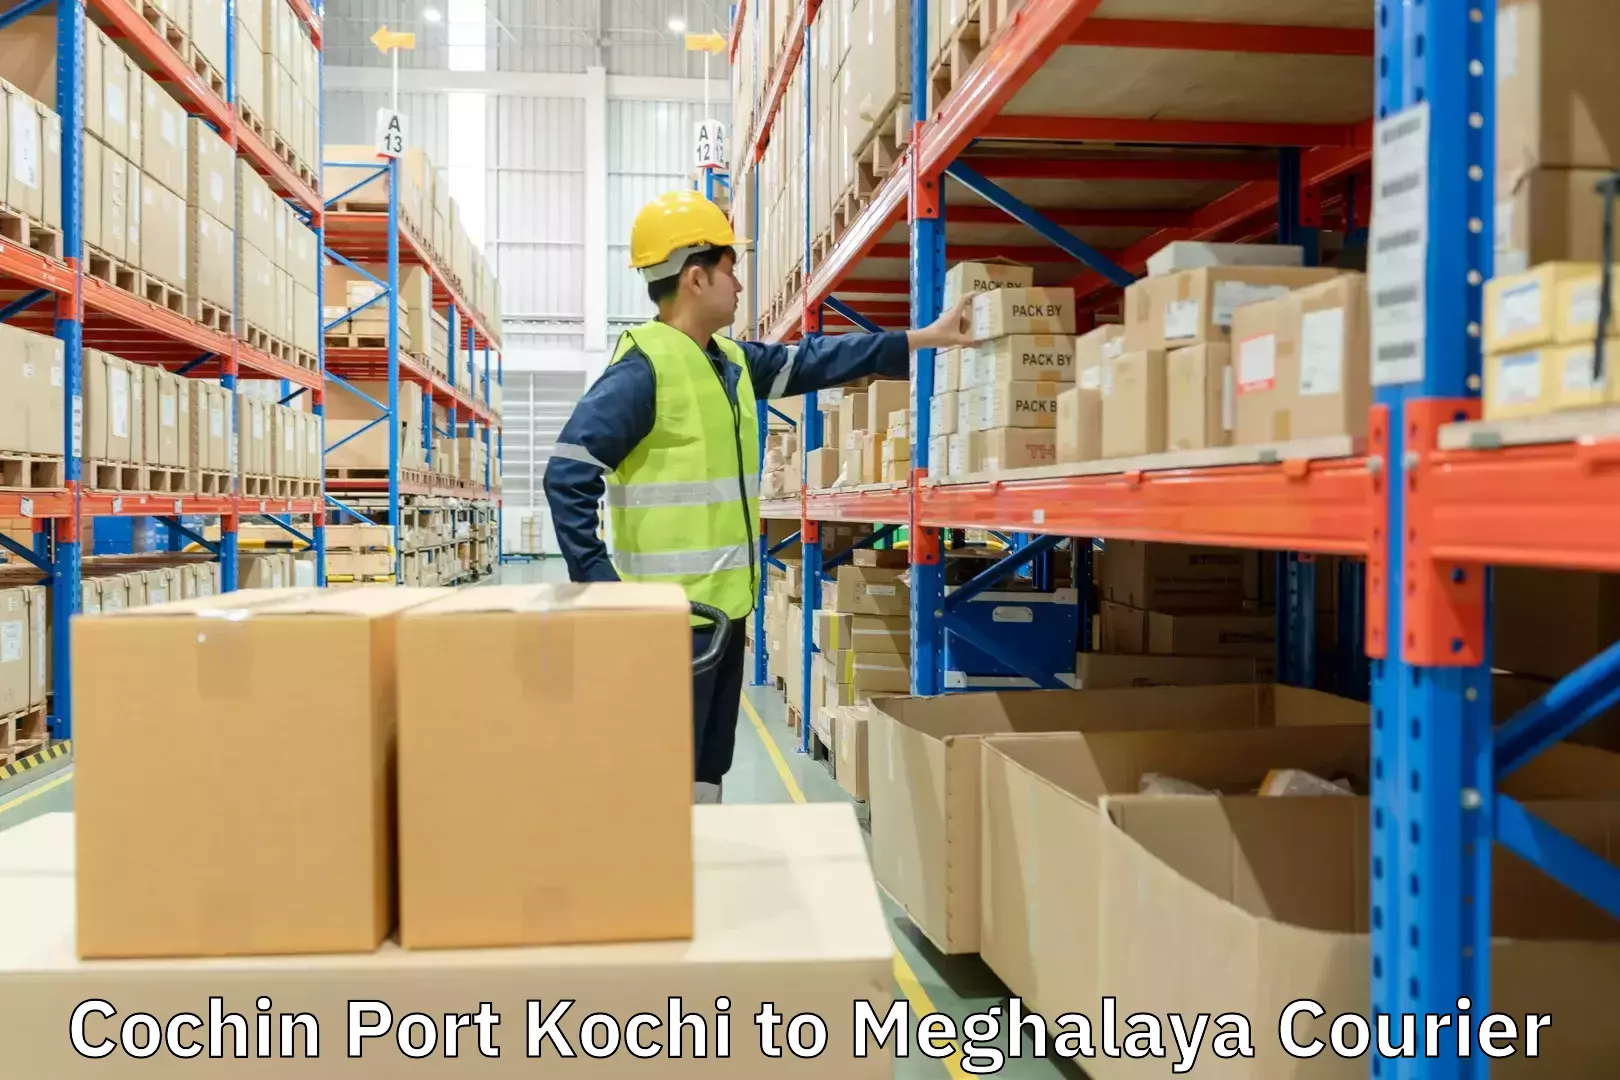 Sustainable shipping practices Cochin Port Kochi to Meghalaya